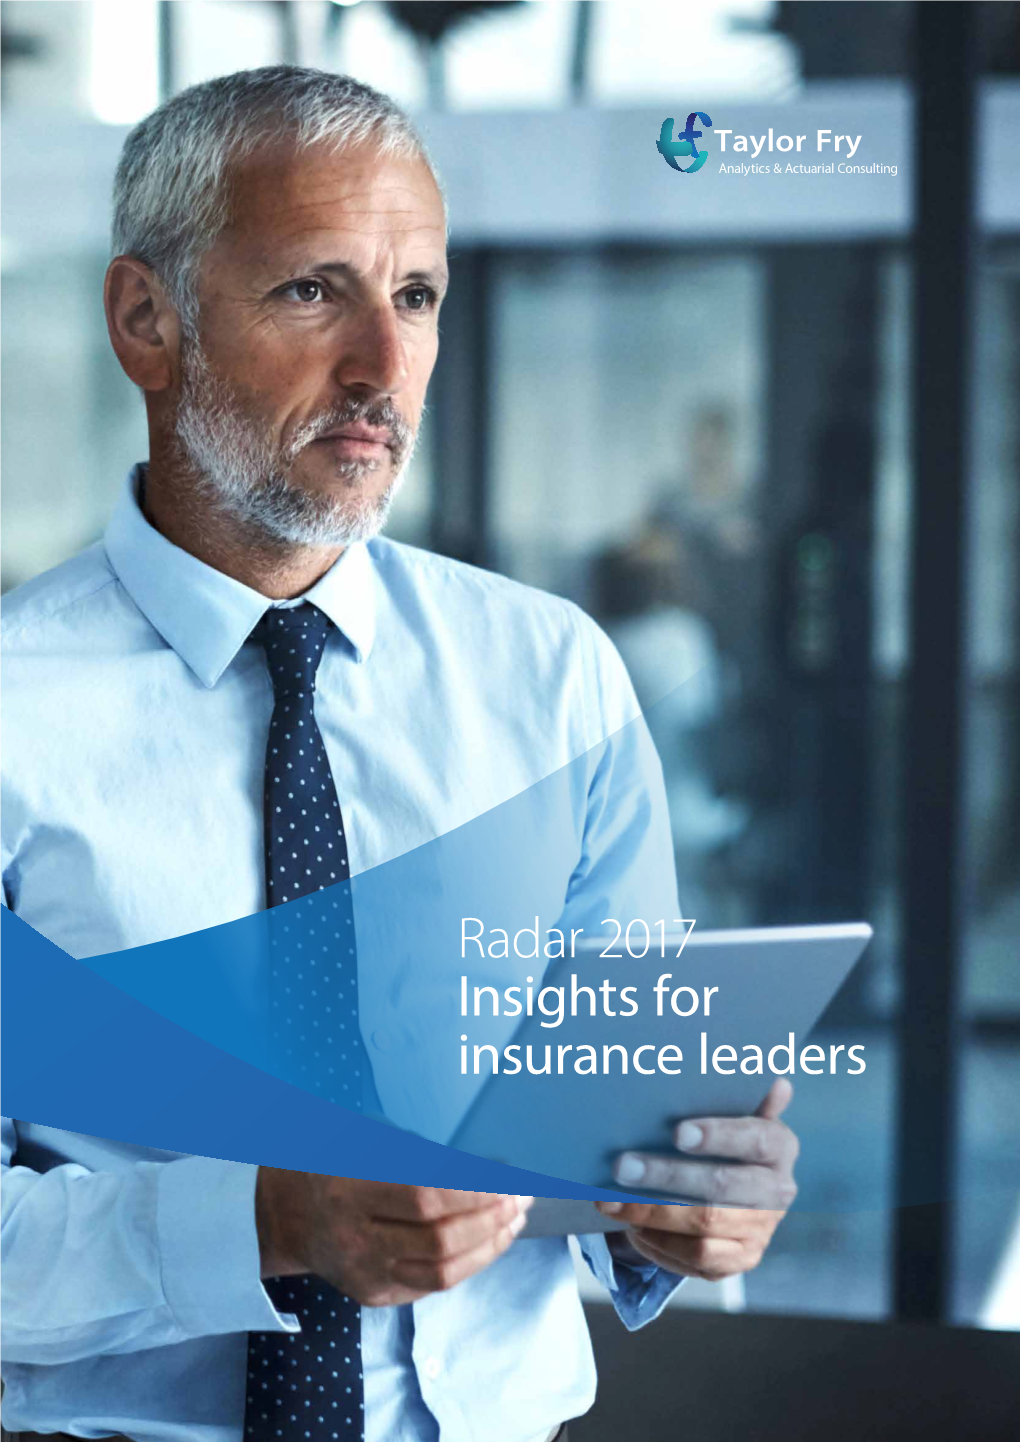 Radar 2017 Insights for Insurance Leaders Taylor Fry Is Pleased to Present Our Third Annual Edition of Radar: Insights for Insurance Leaders